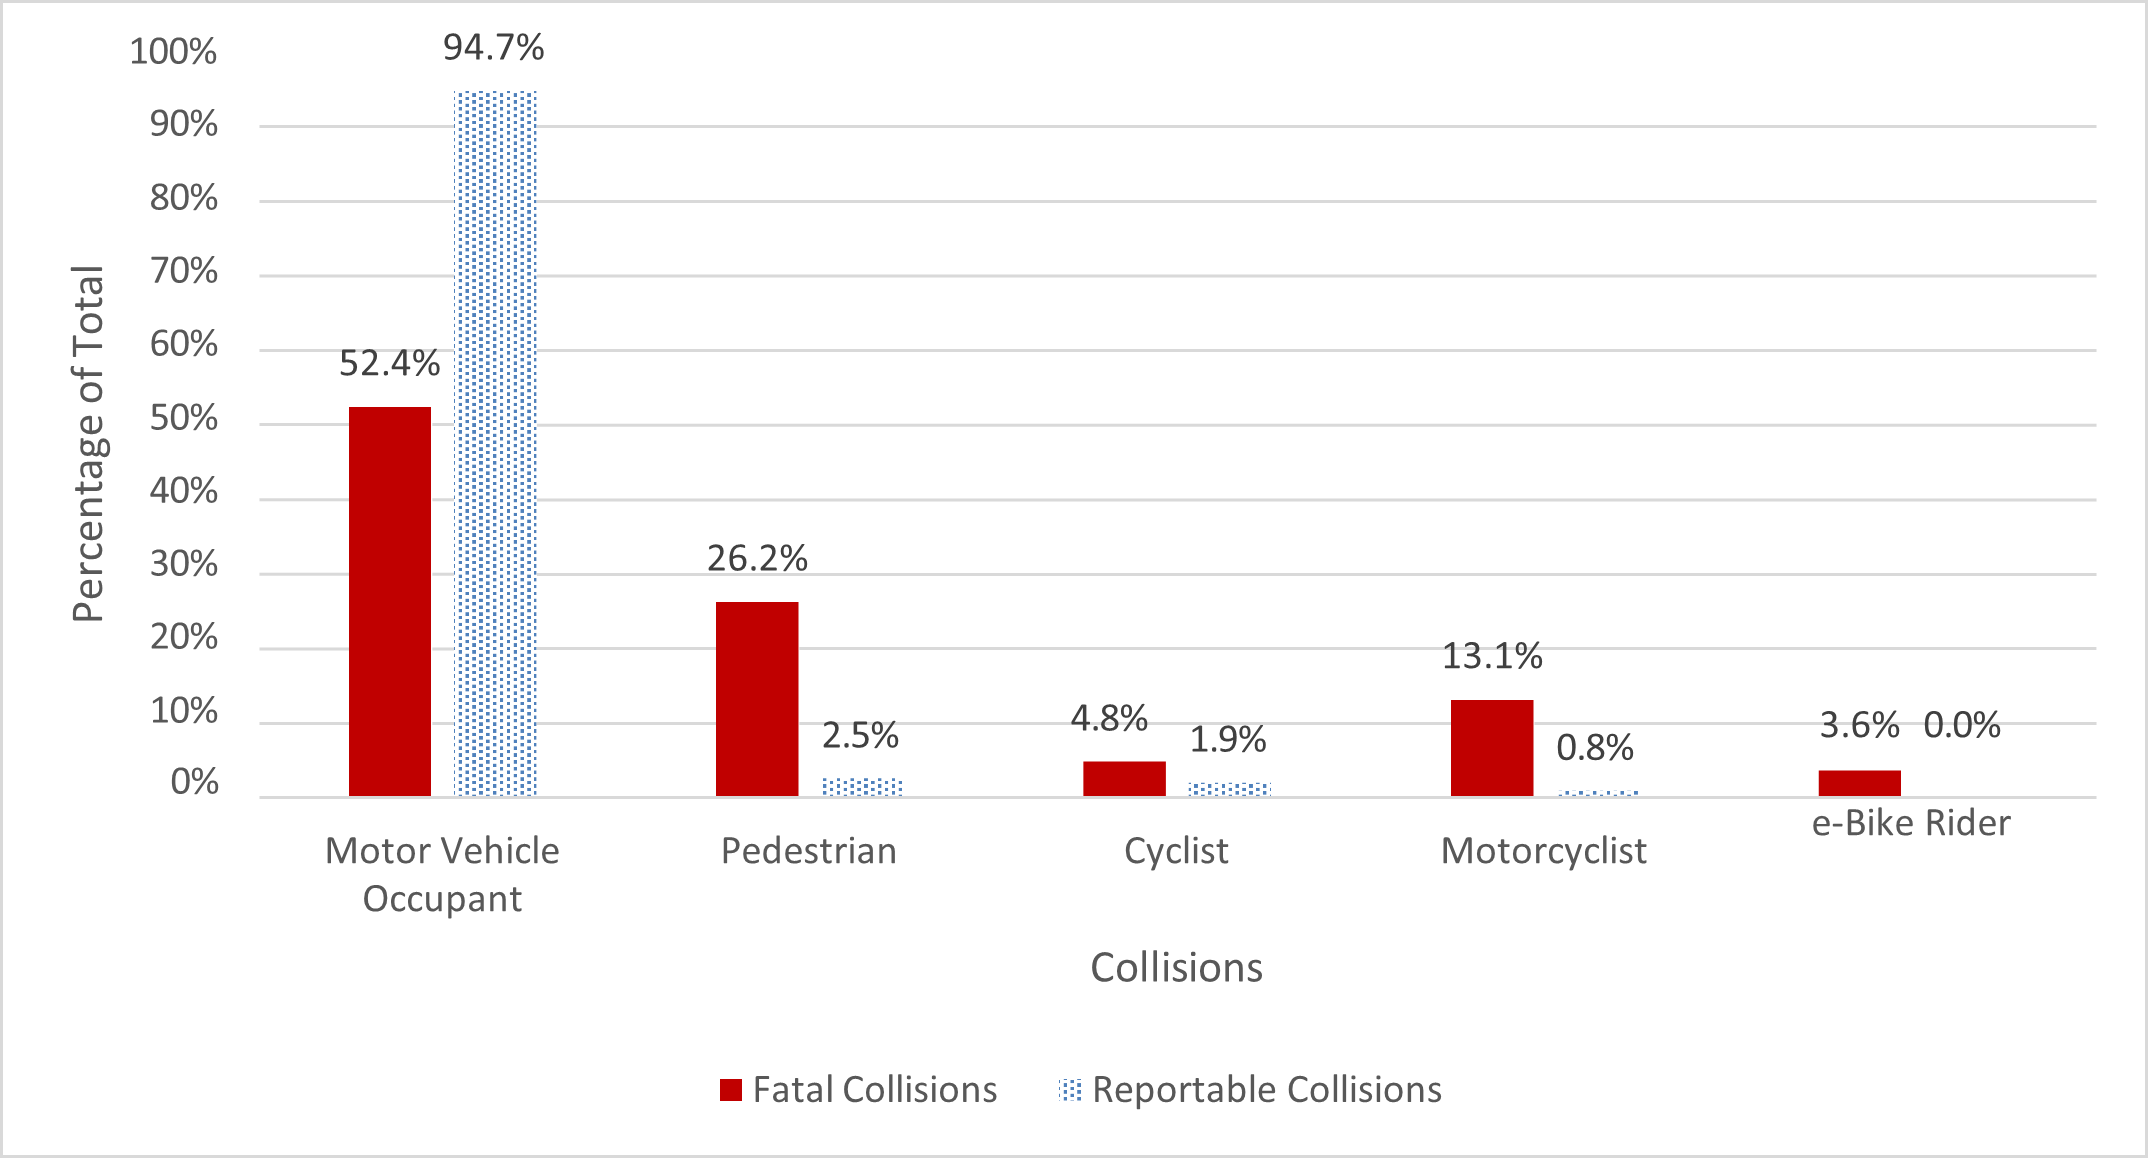 Bar graph showing the types of road users and how often they were involved in either fatal collisions or reportable collisions. 